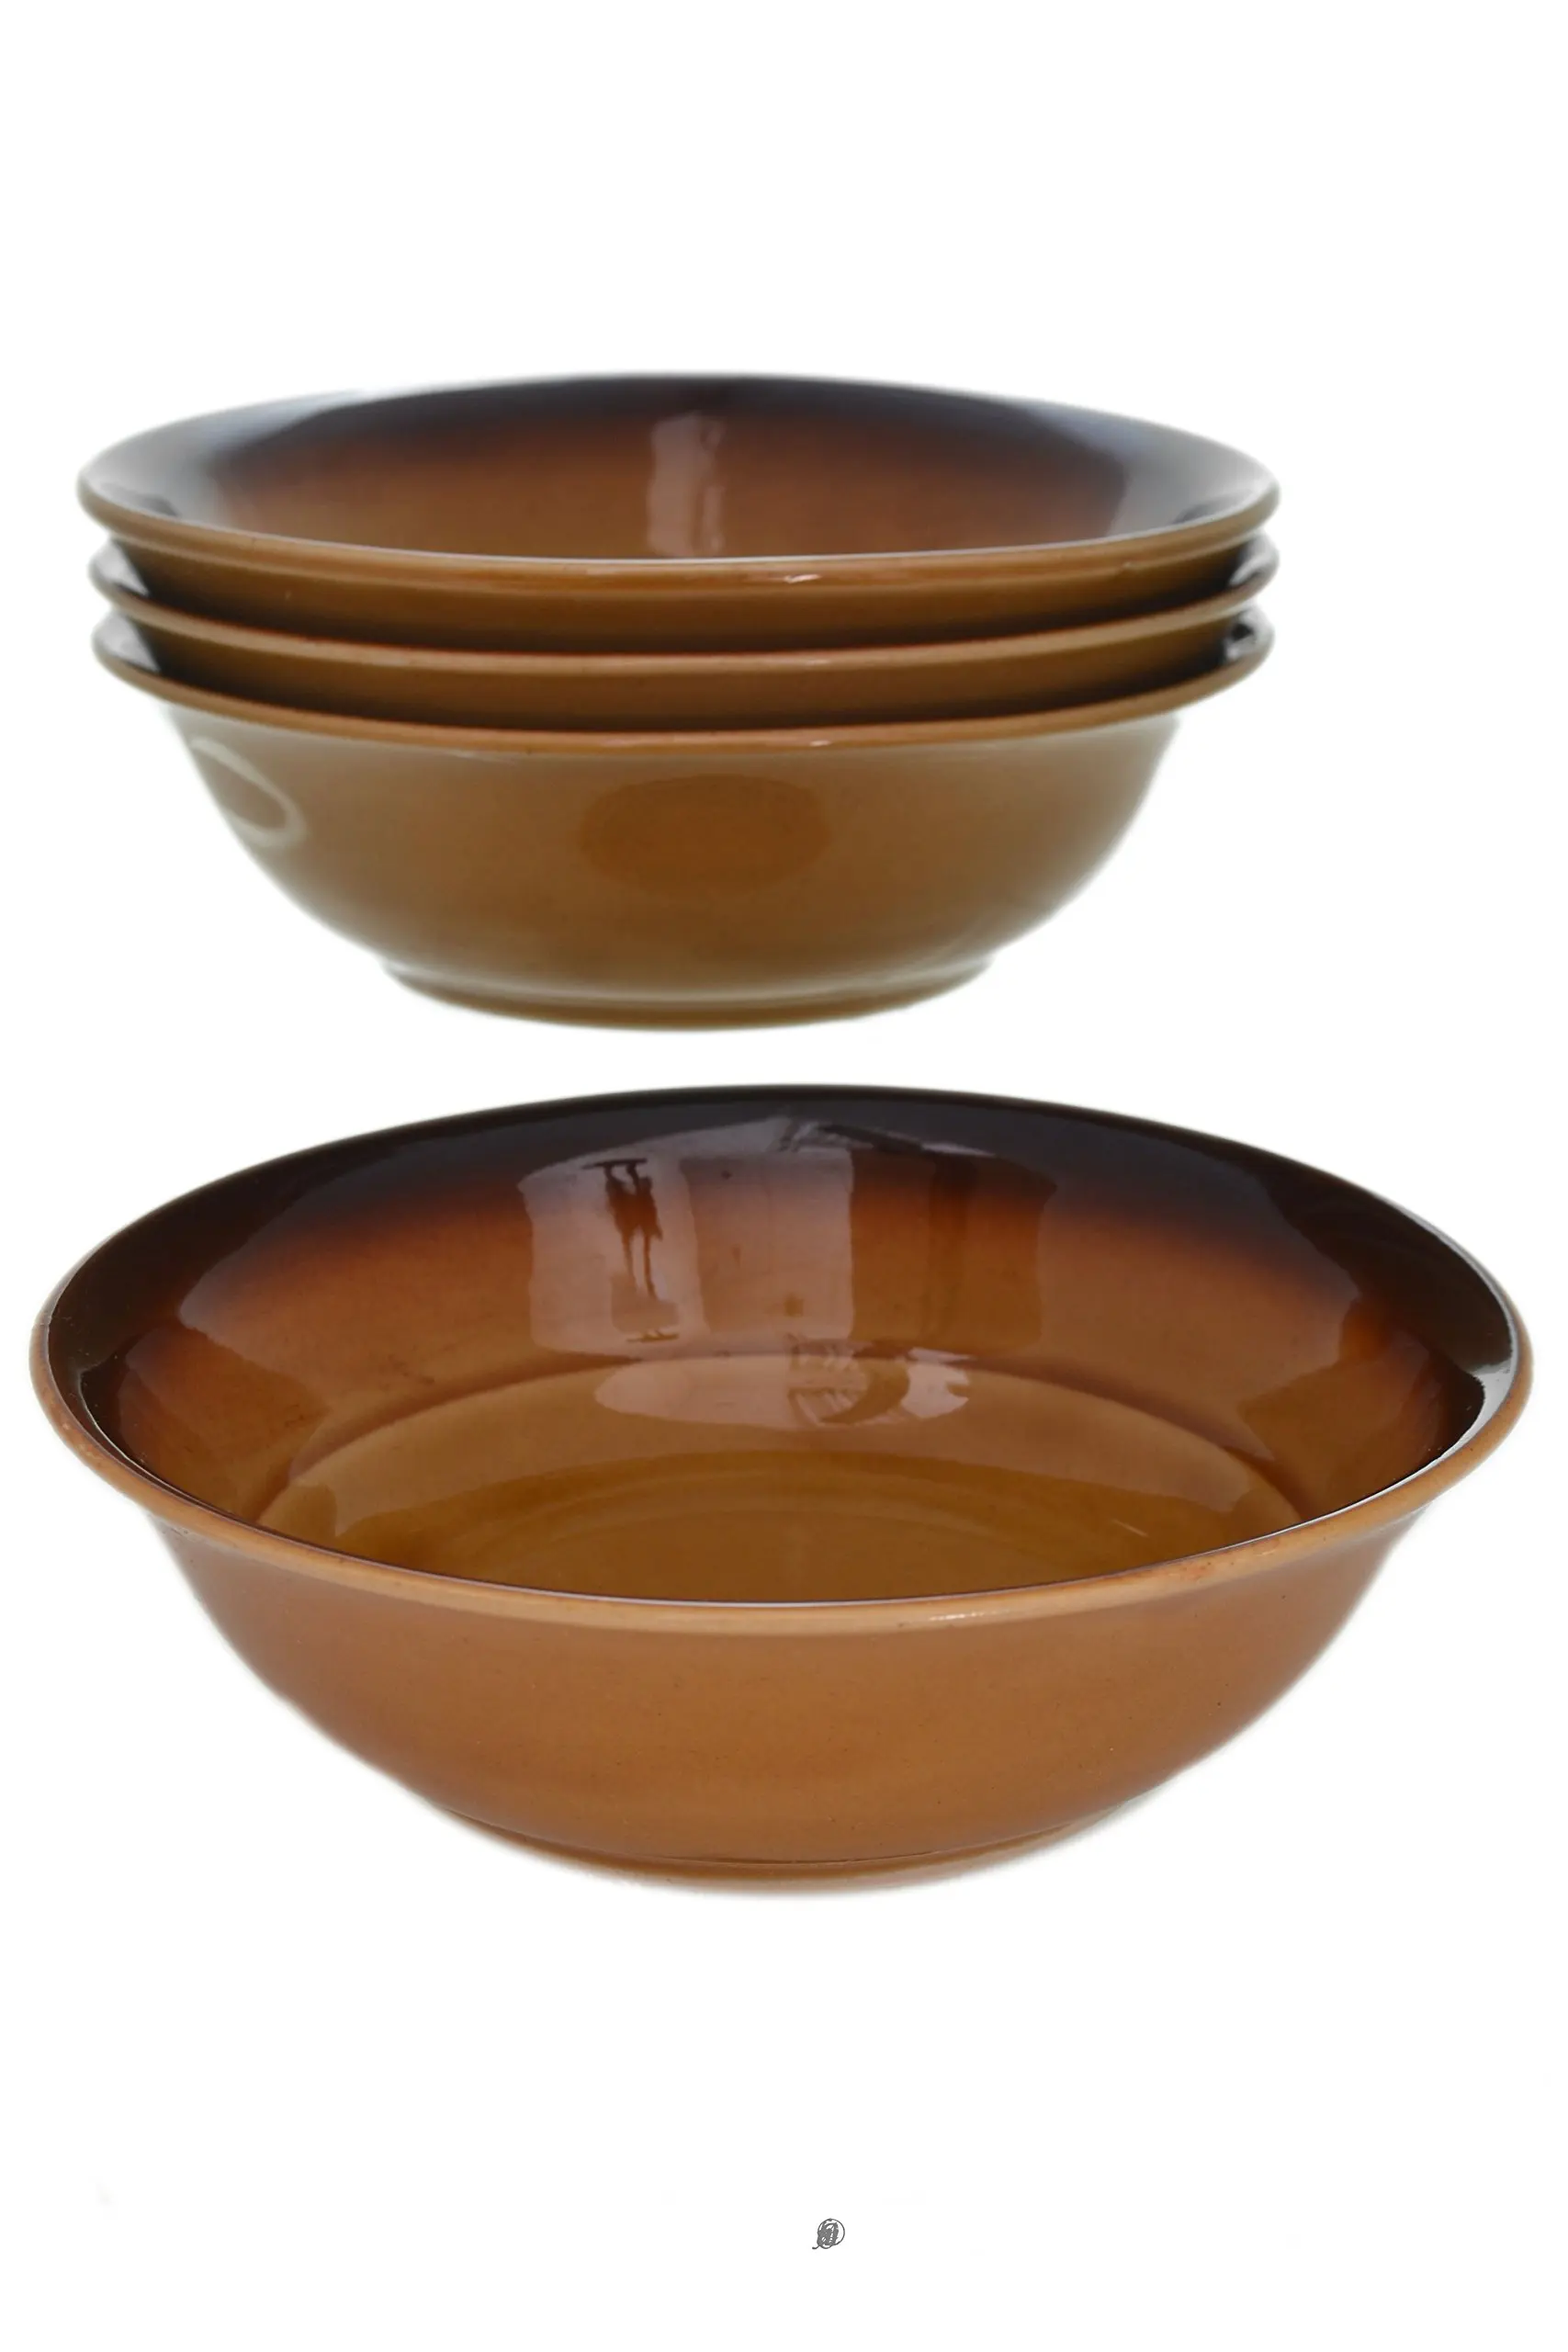 Buy 2 Cereal Bowls Basketball Style 6 by Mulberry Home Collection